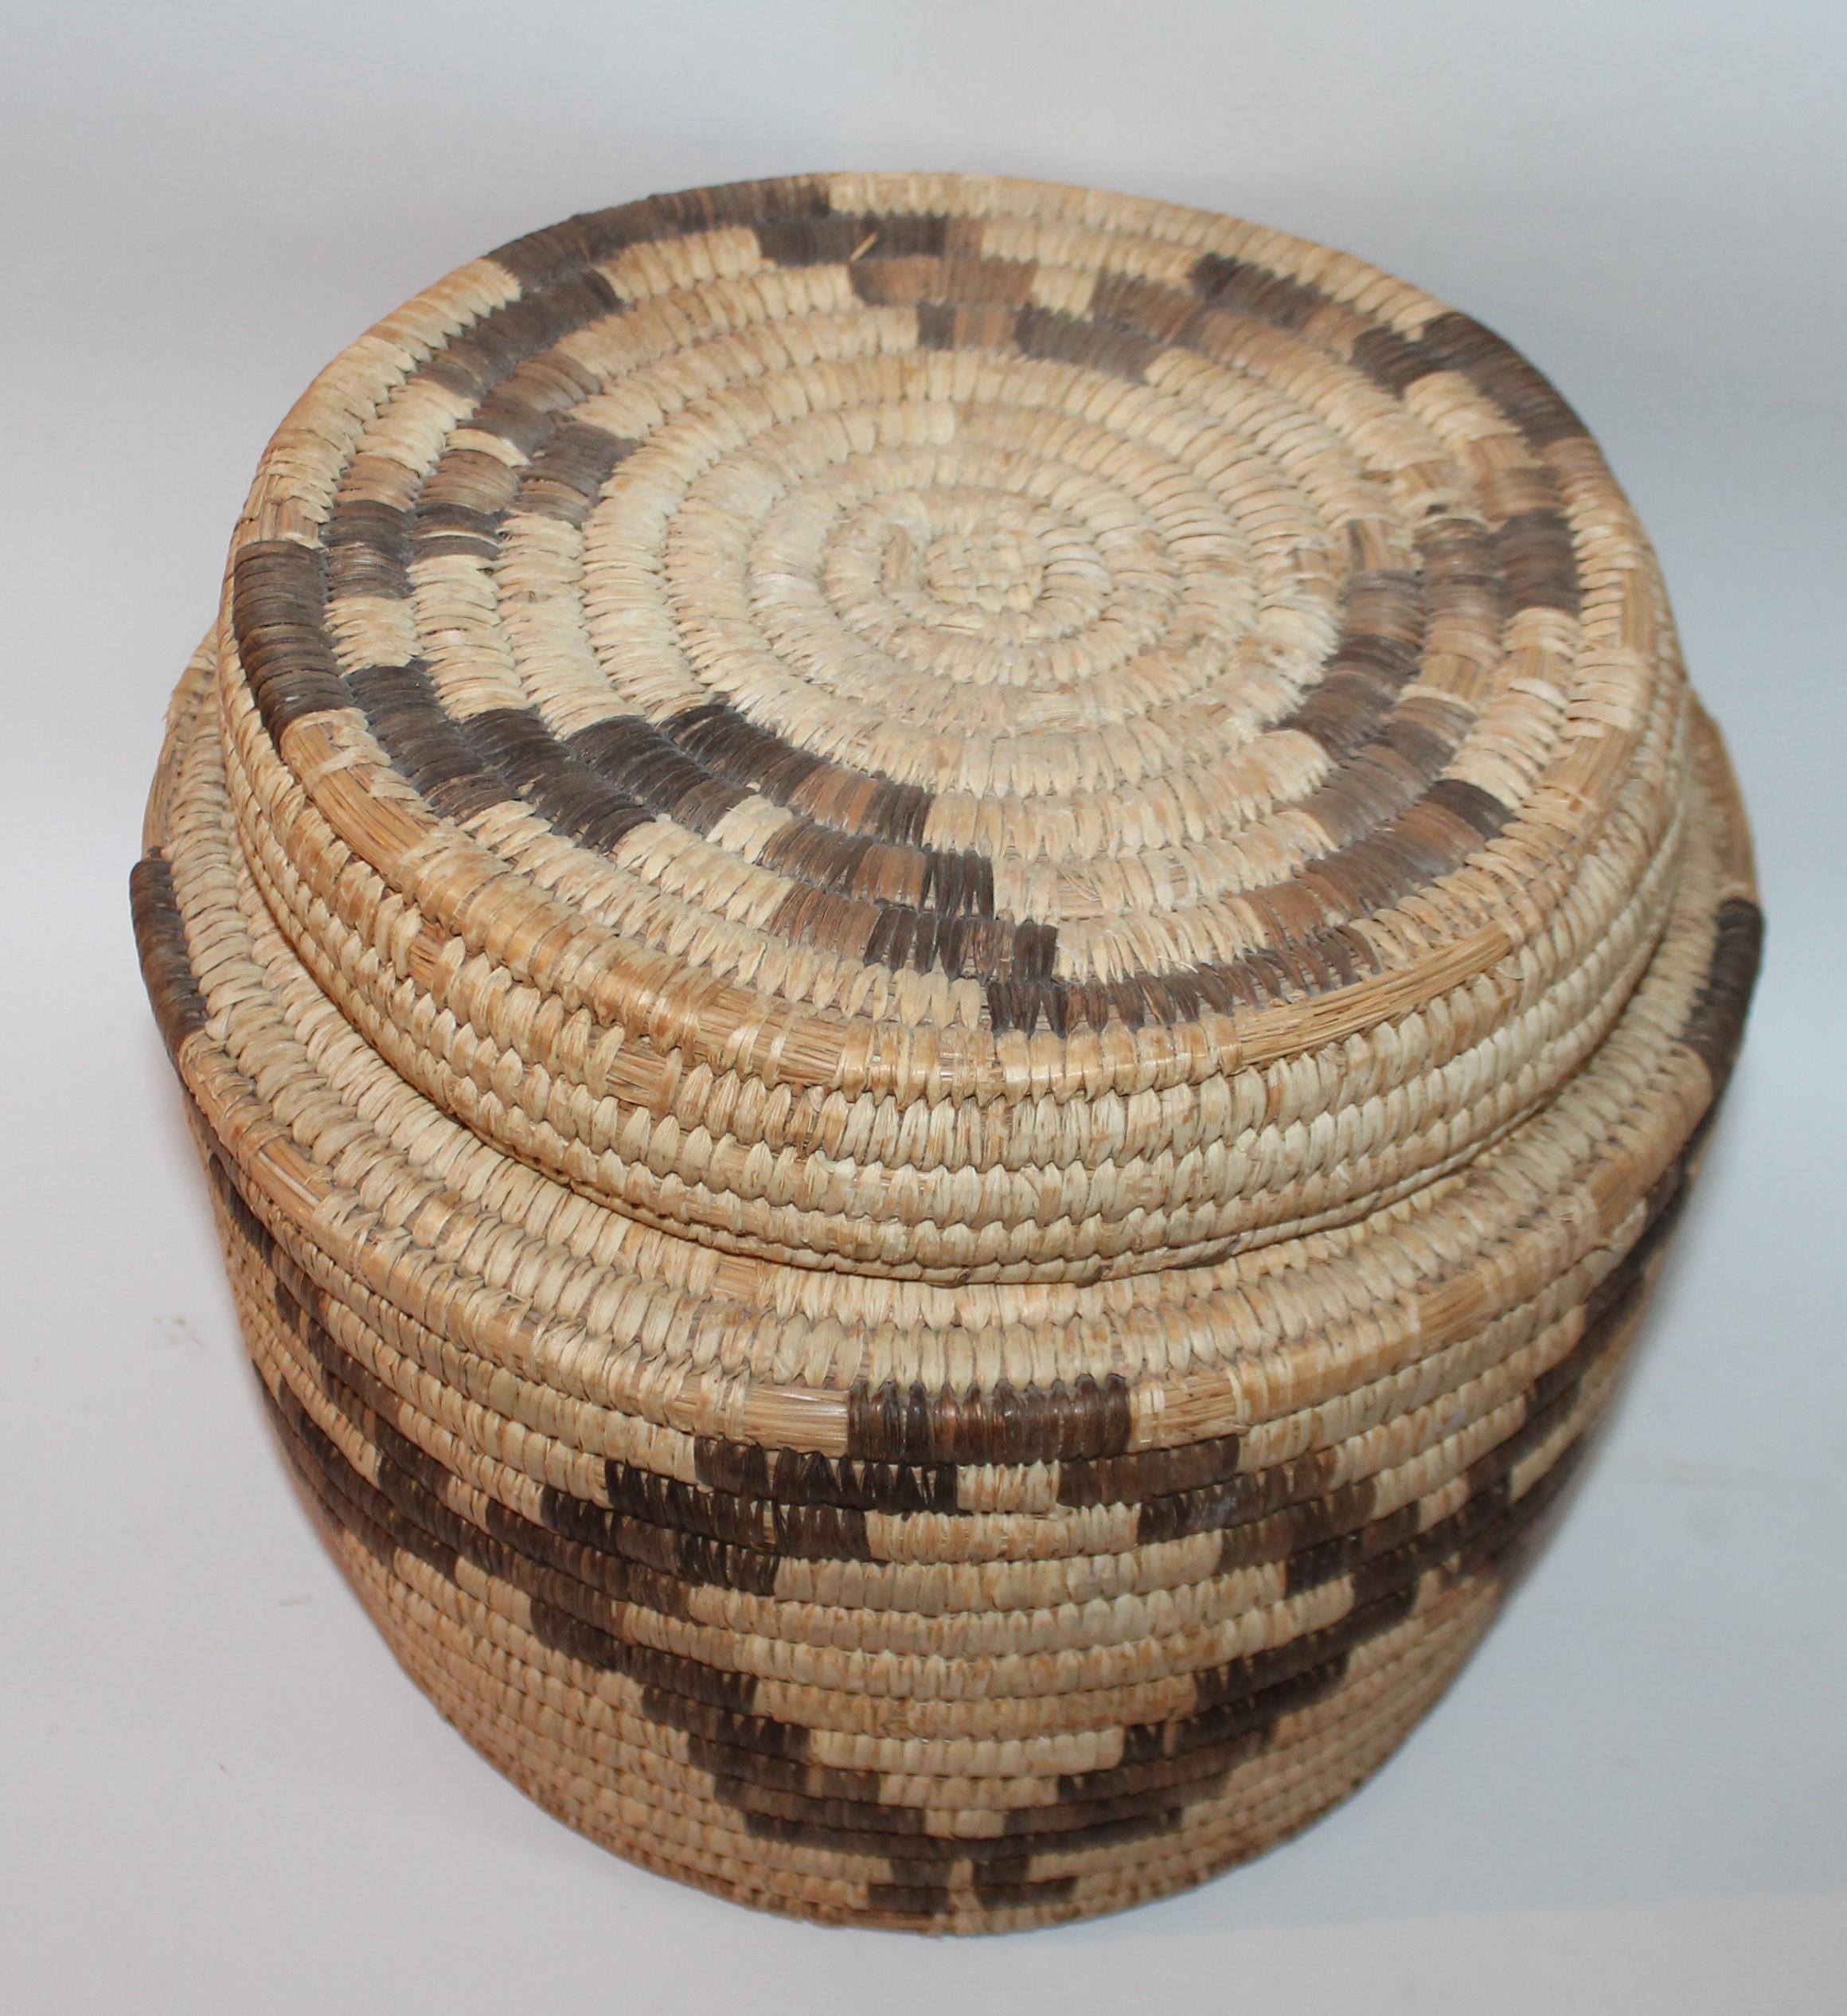 Large lidded Papago basket in good condition. The large basket is made from sea grass. Great pattern and great age with patina.